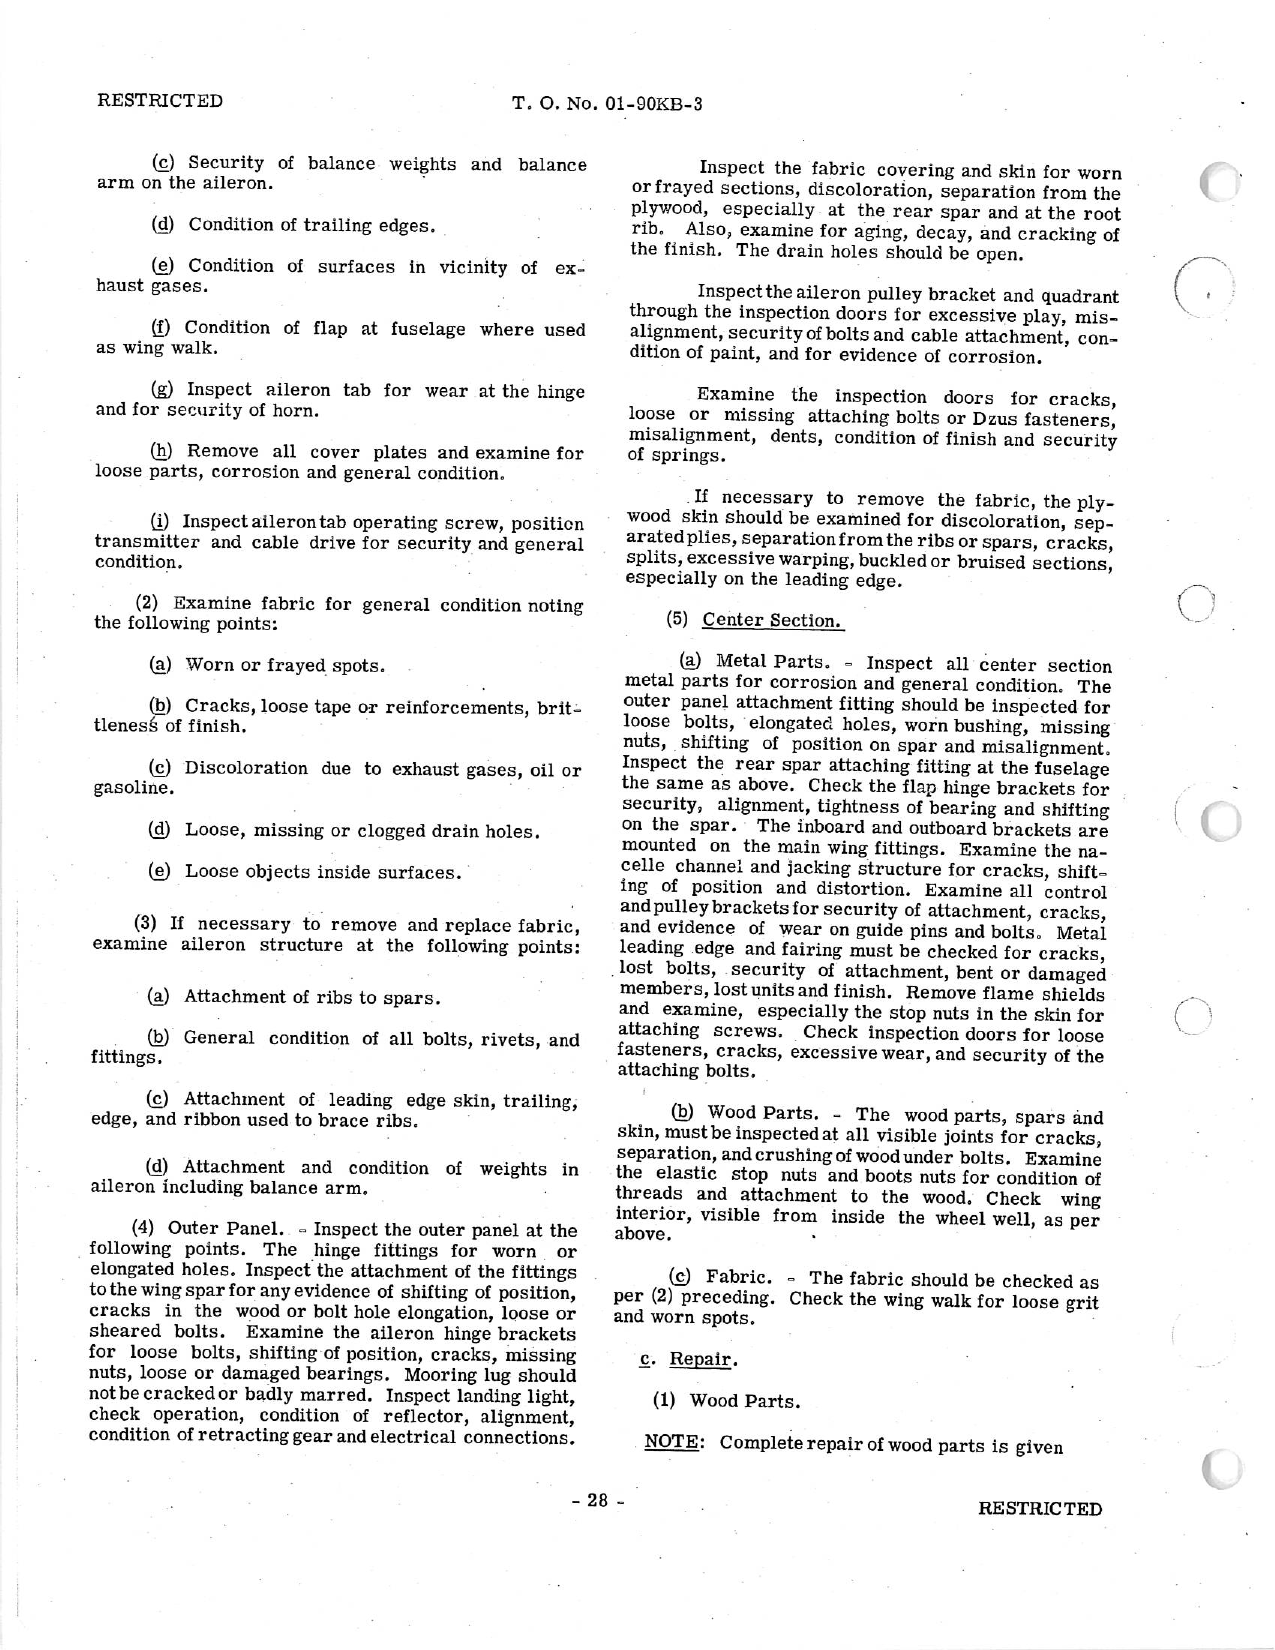 Sample page 30 from AirCorps Library document: Handbook of Overhaul Instructions: AT-10